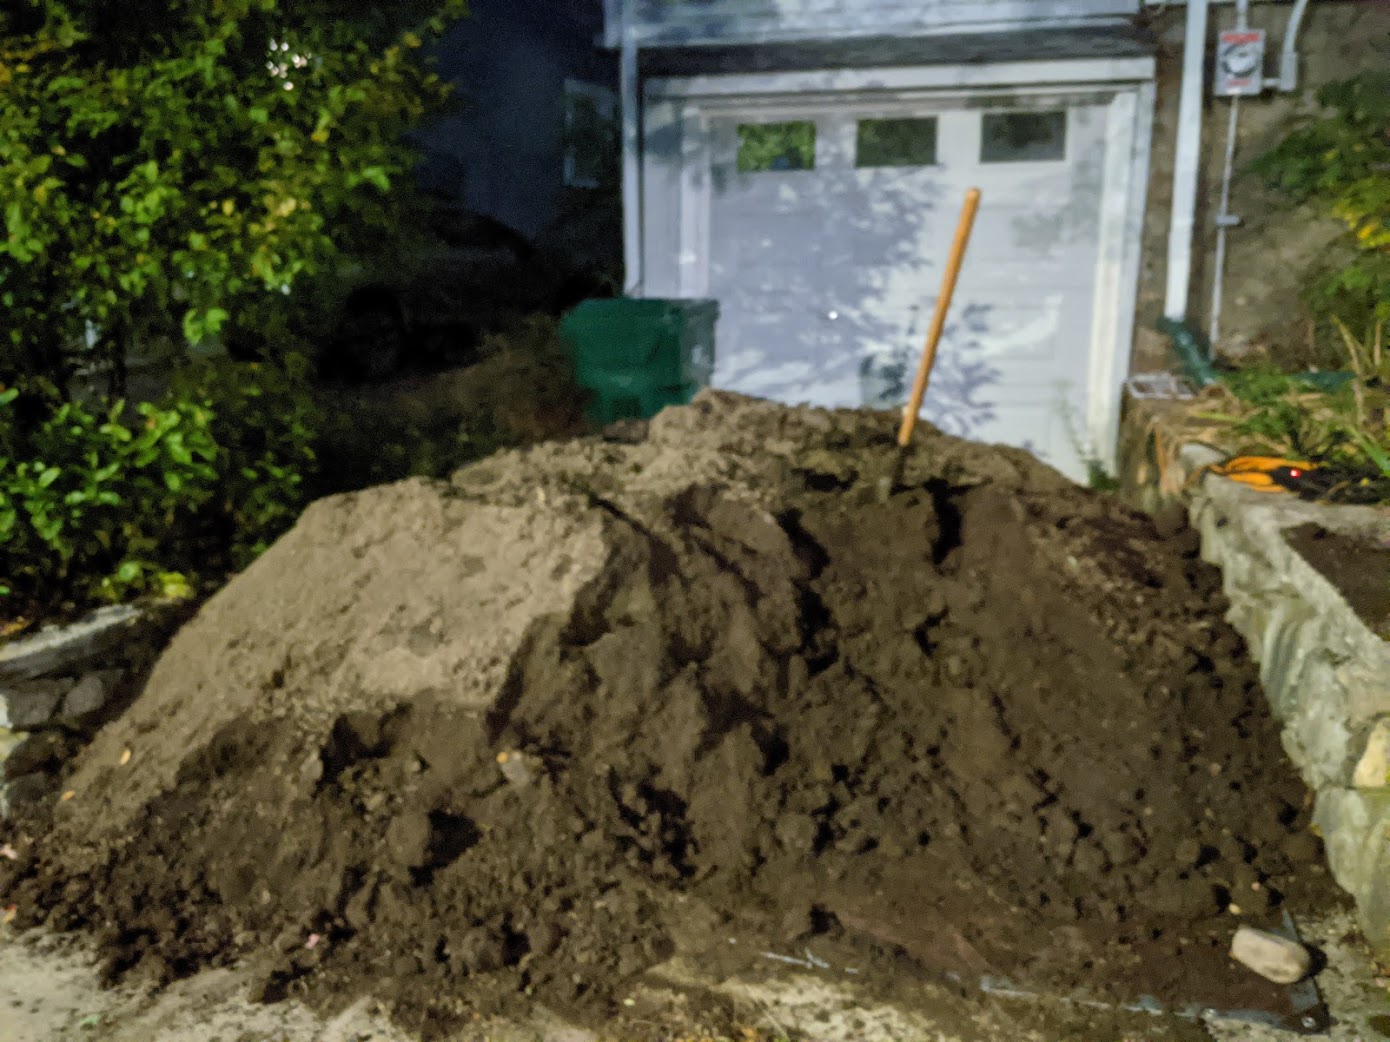 Roughly 7 cubic yards of dirt